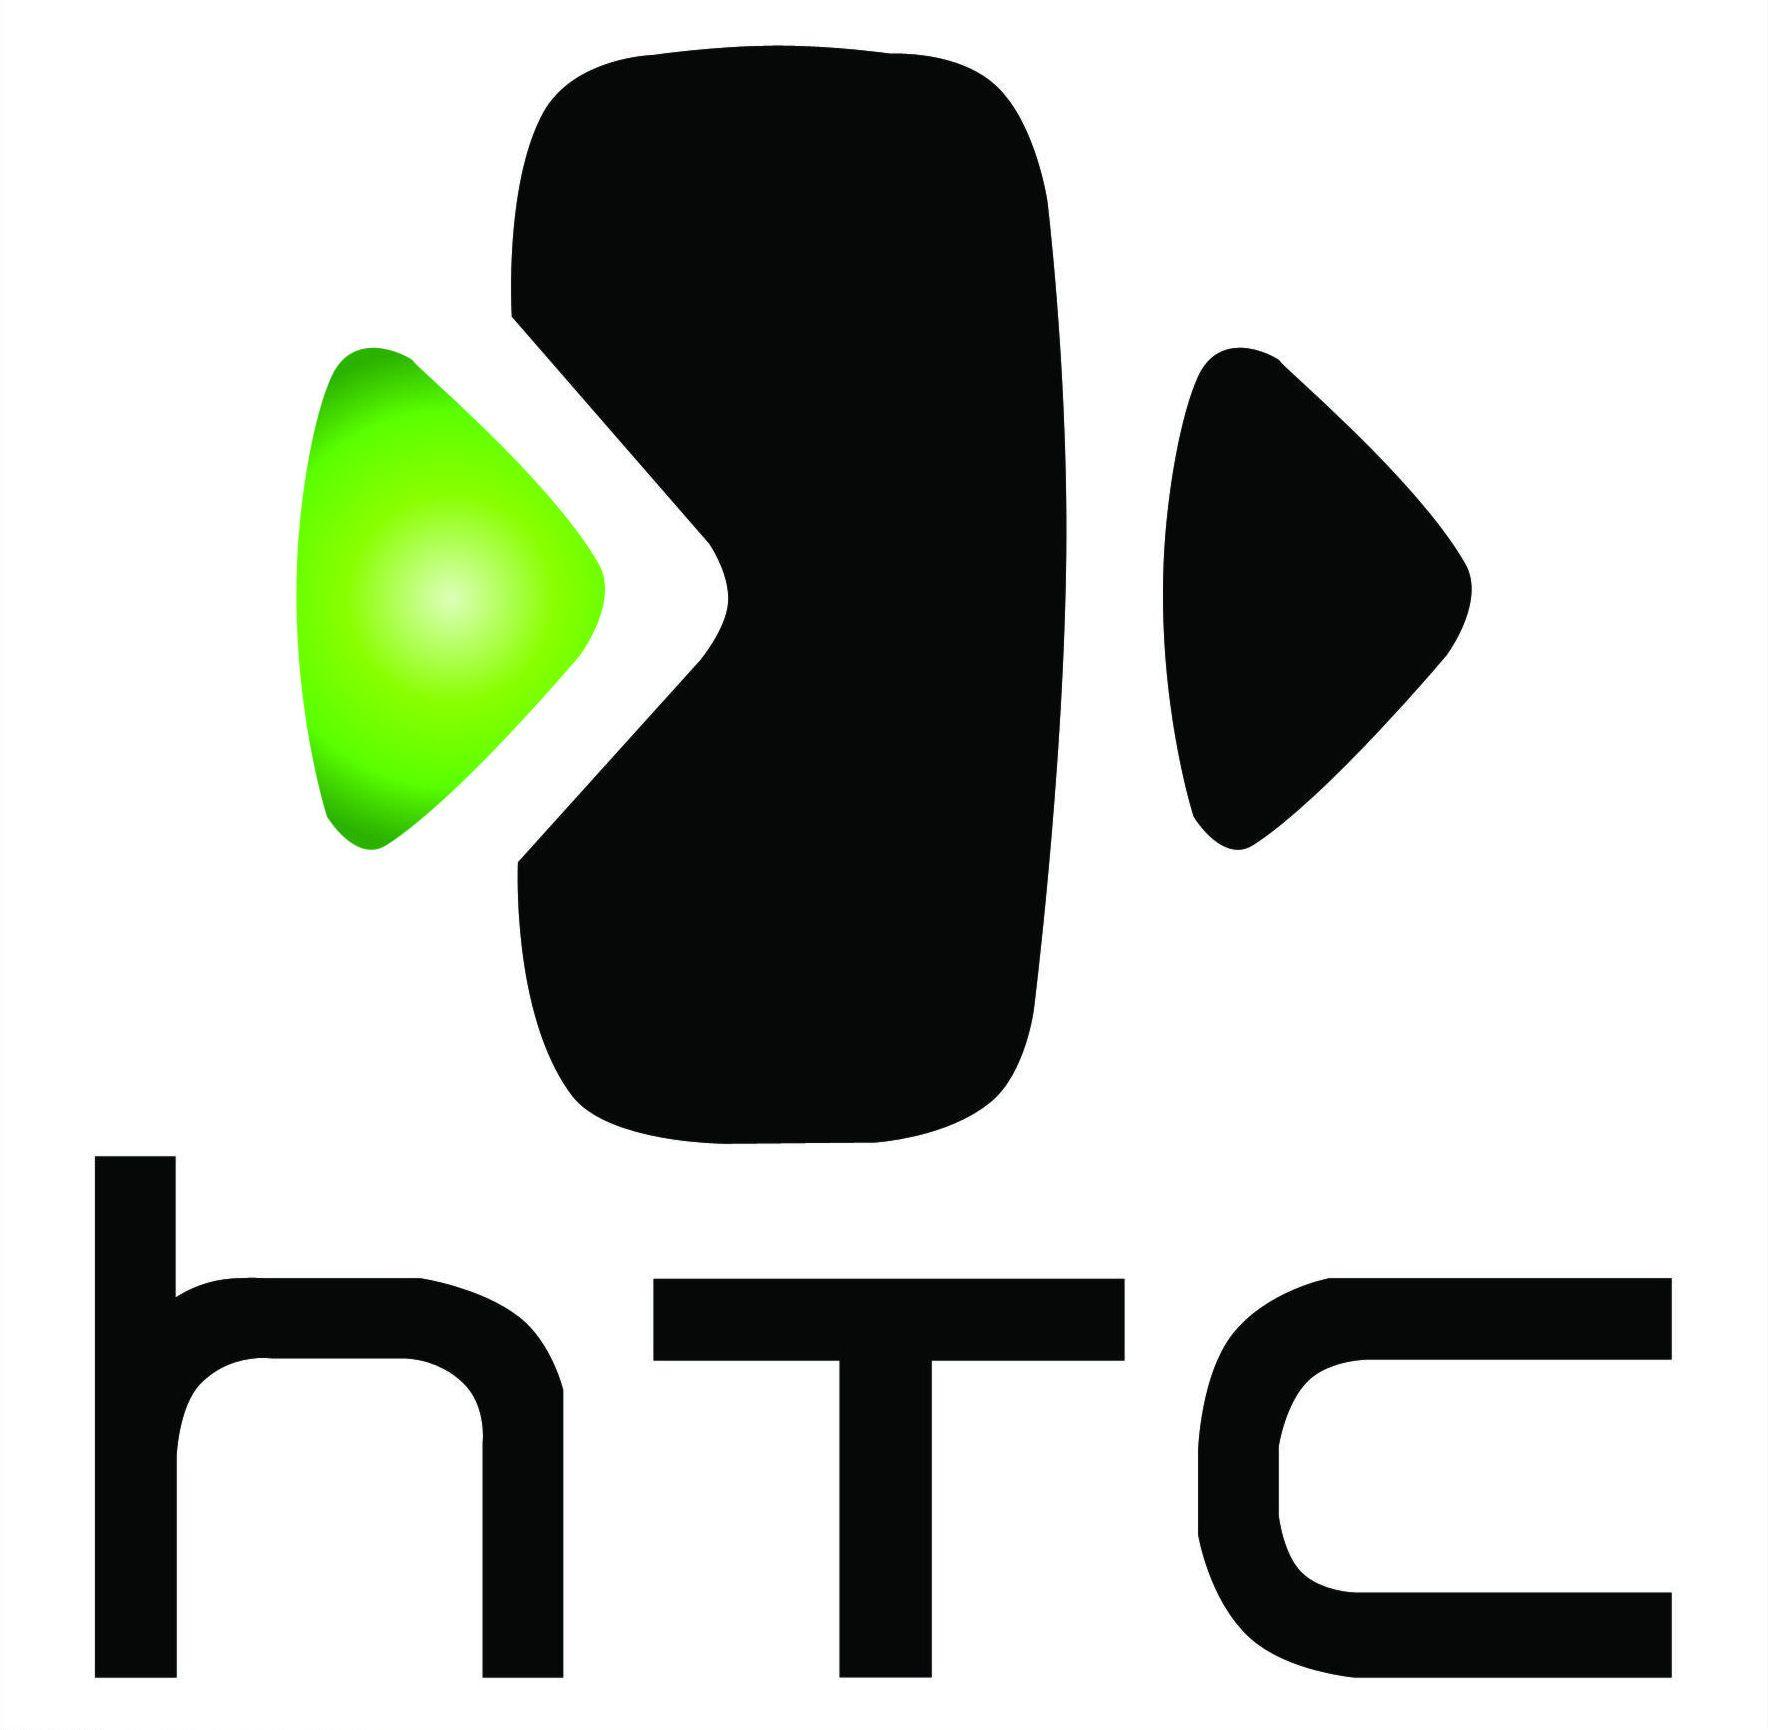 HTC Phone Logo - HTC Hopes To Send Its Vive VR Headset To Chinese Internet Cafes ...